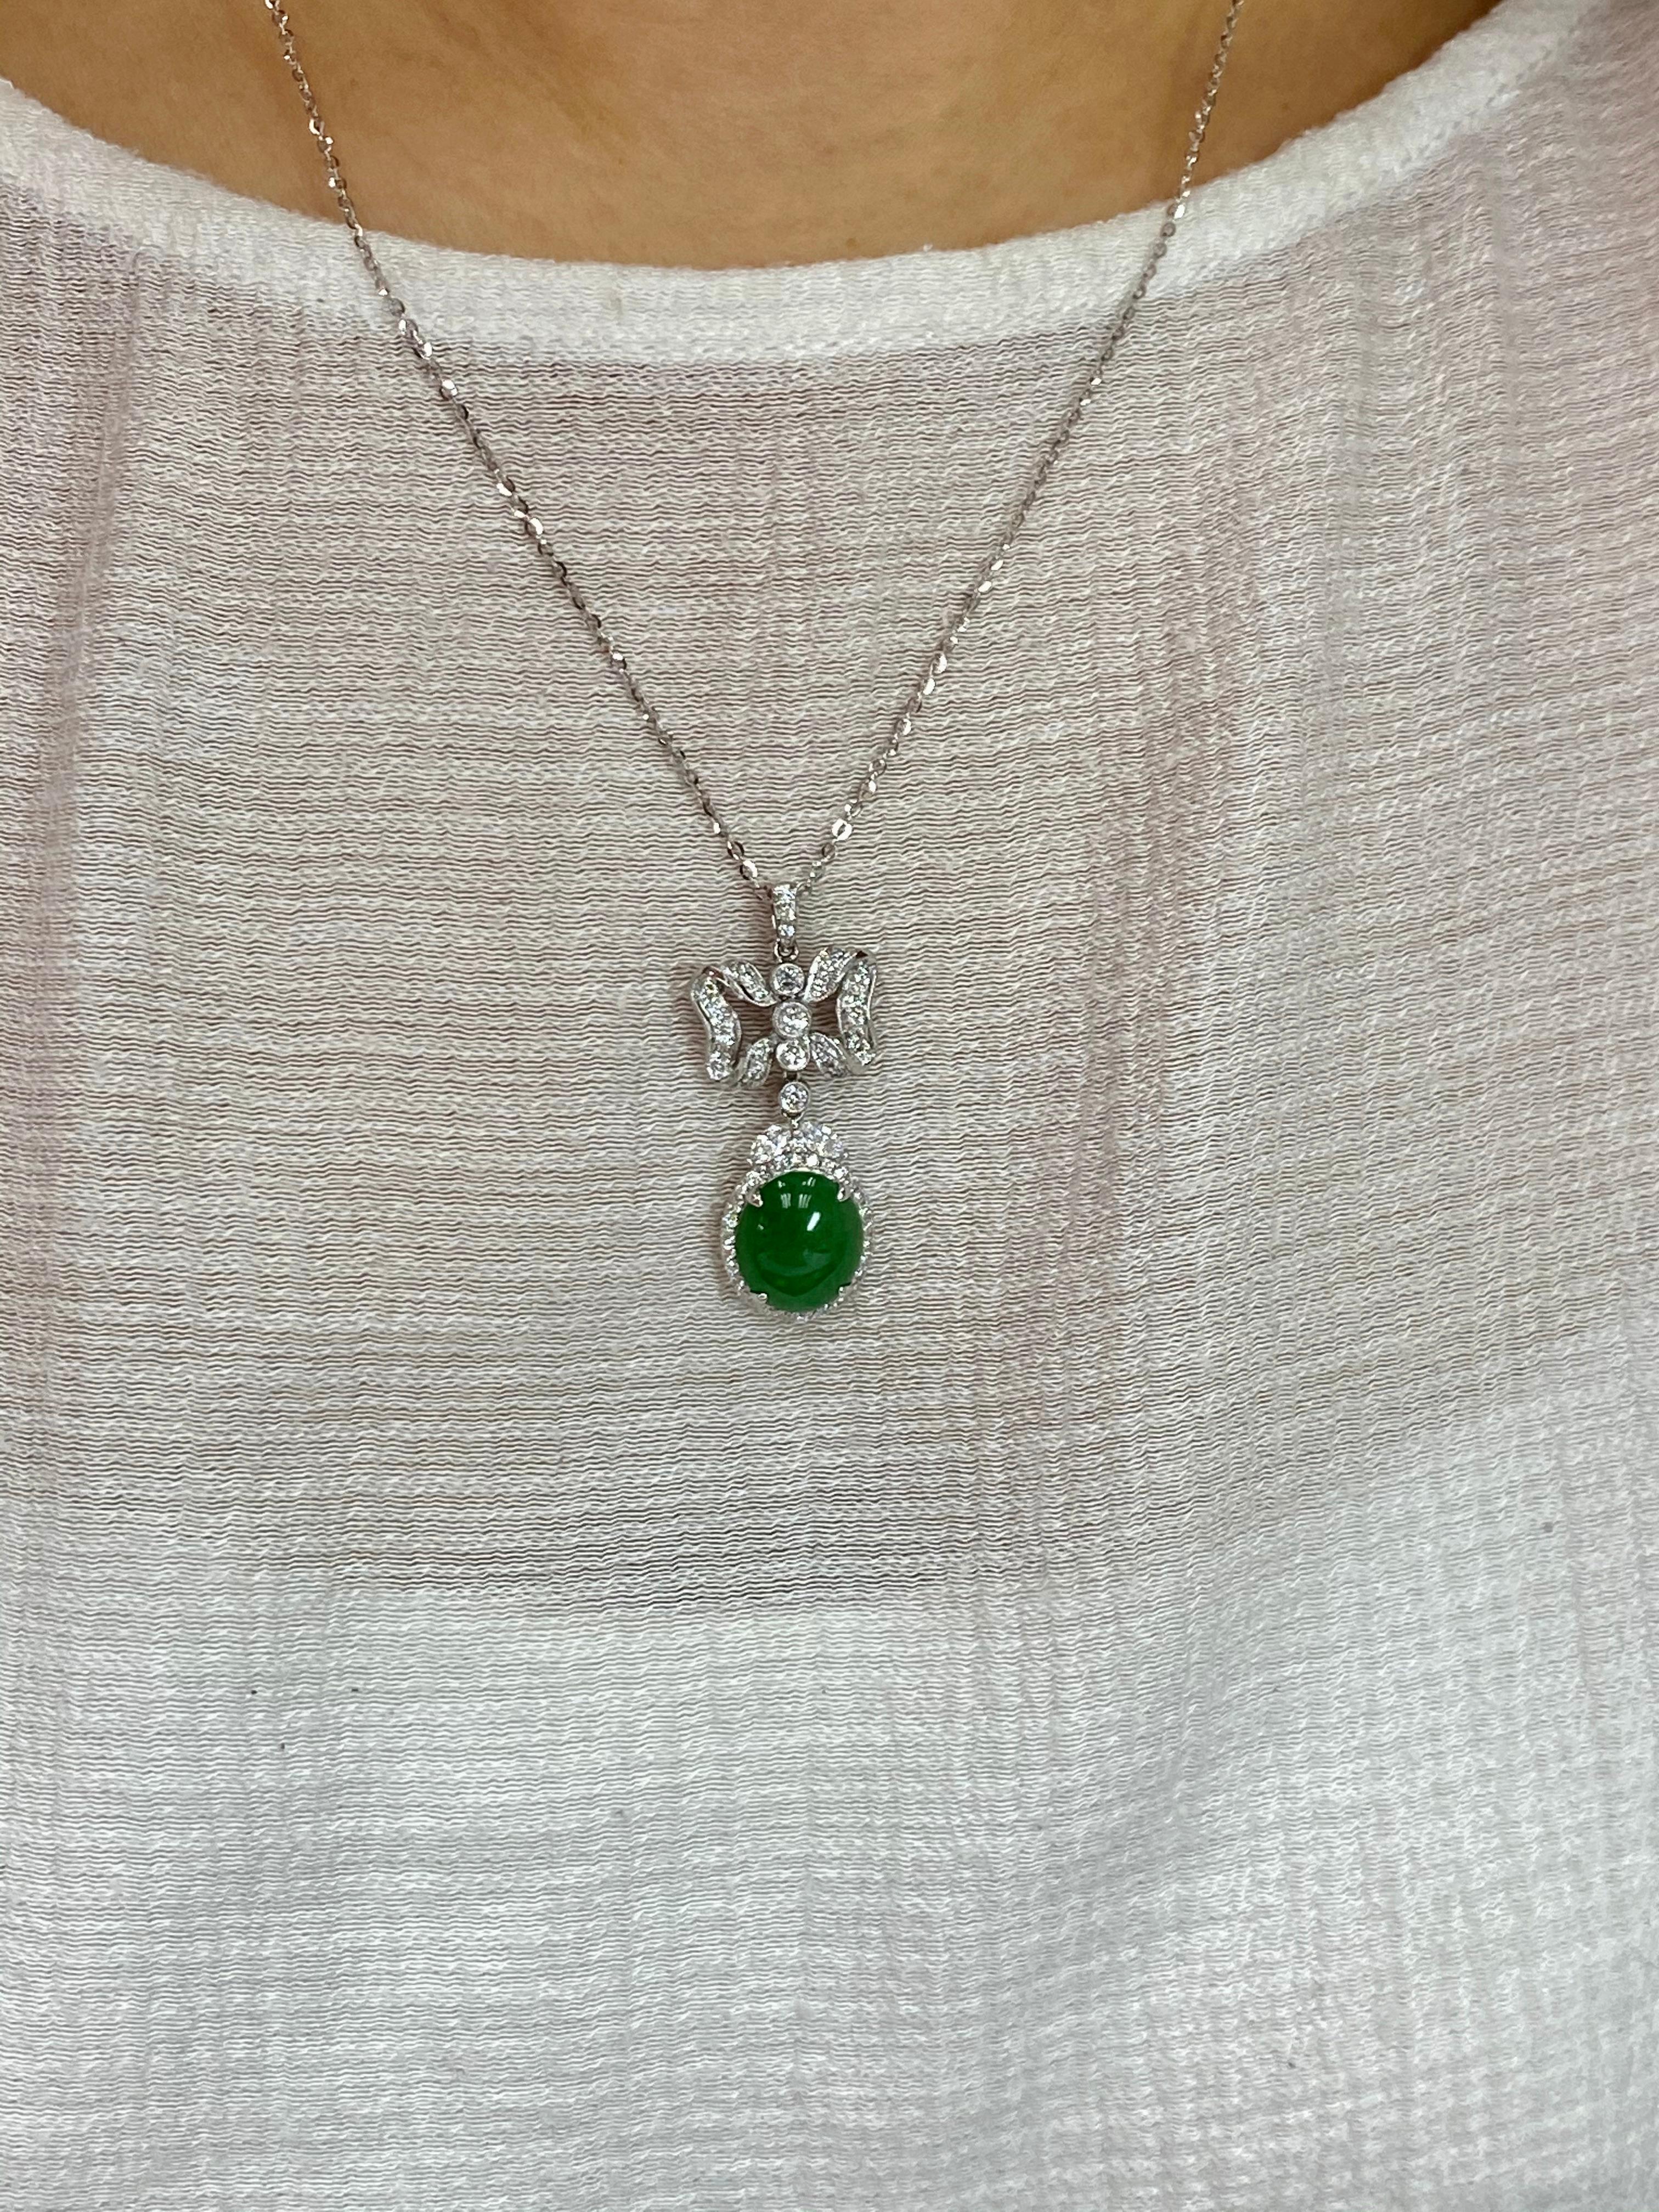 Natural Type A Jadeite Jade Diamond Pendant Drop Necklace, Deep Green Color In New Condition For Sale In Hong Kong, HK